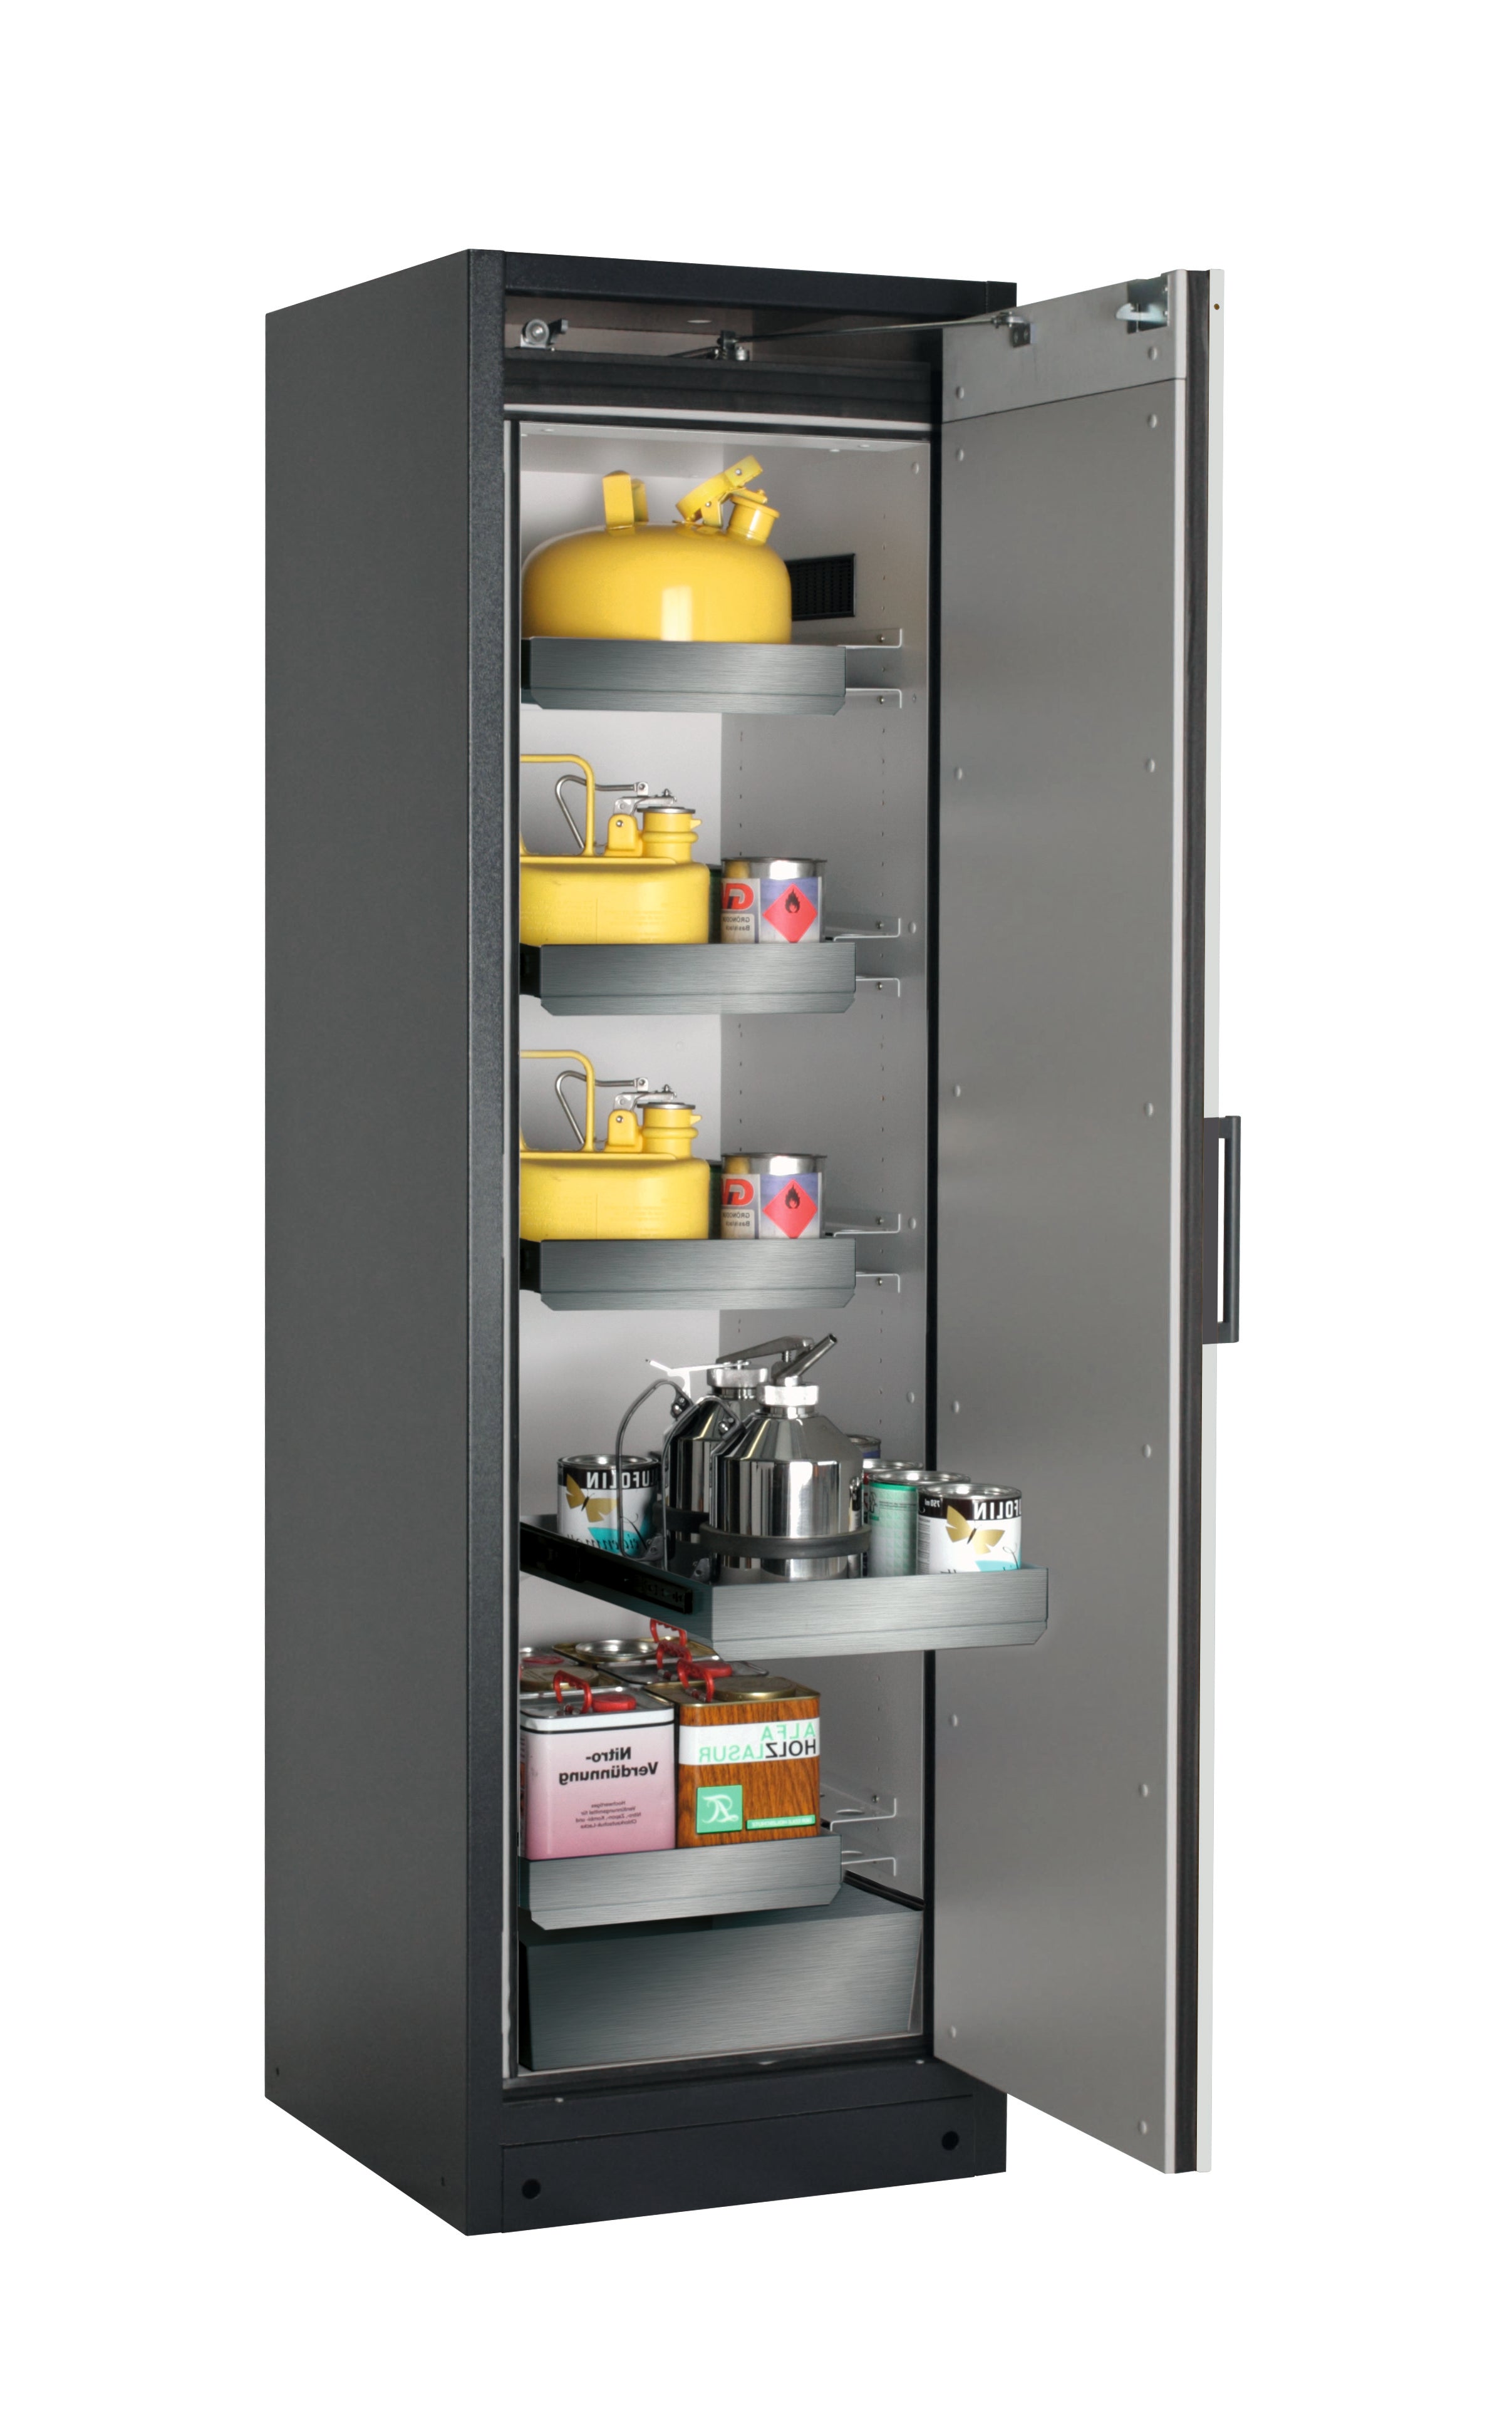 Type 90 safety storage cabinet Q-PEGASUS-90 model Q90.195.060.WDACR in light grey RAL 7035 with 4x drawer (standard) (stainless steel 1.4301),